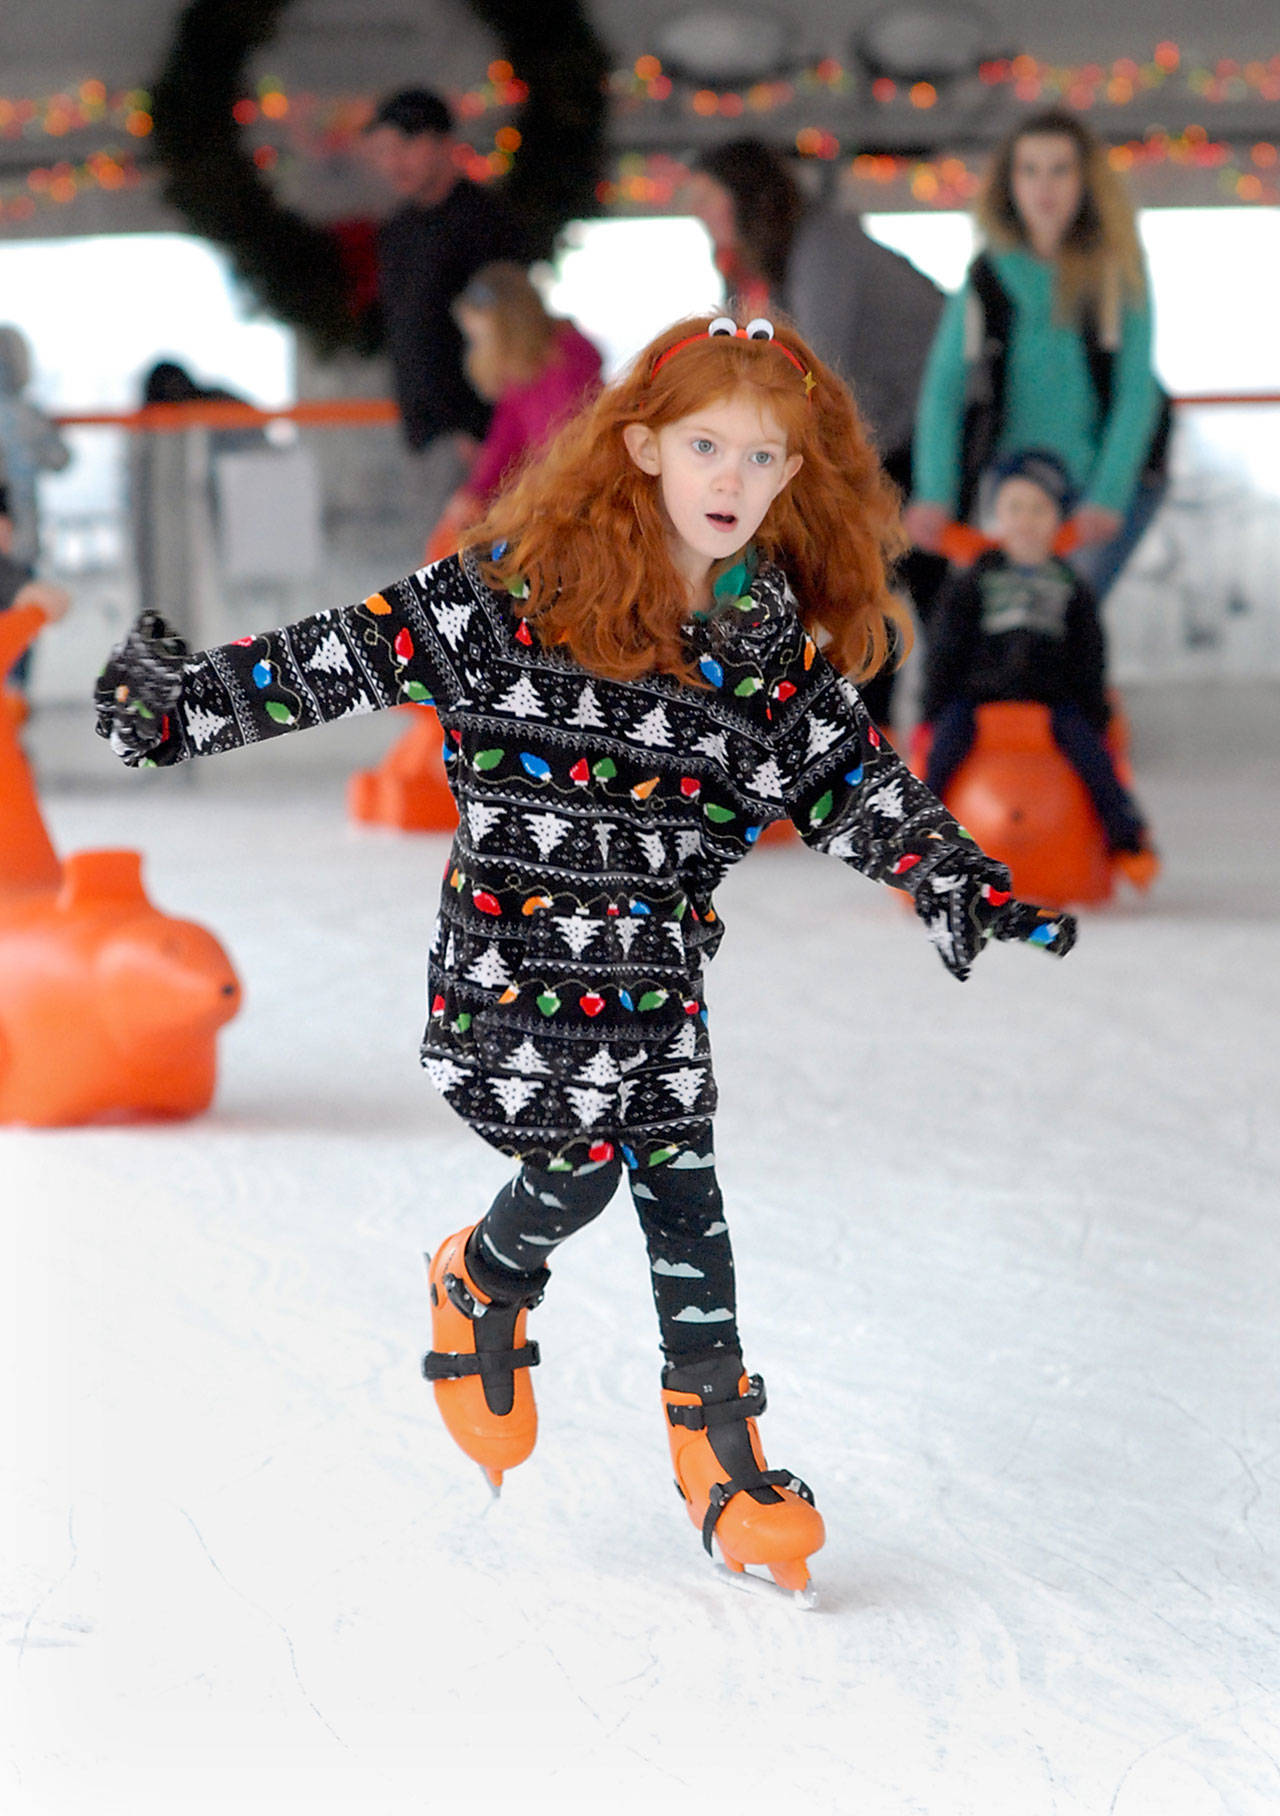 Seven-year-old Alana Emerton of Port Angeles shows grim determination to stay upright as she skates at the Port Angeles Winter Ice Village on Saturday. (Keith Thorpe/Peninsula Daily News)